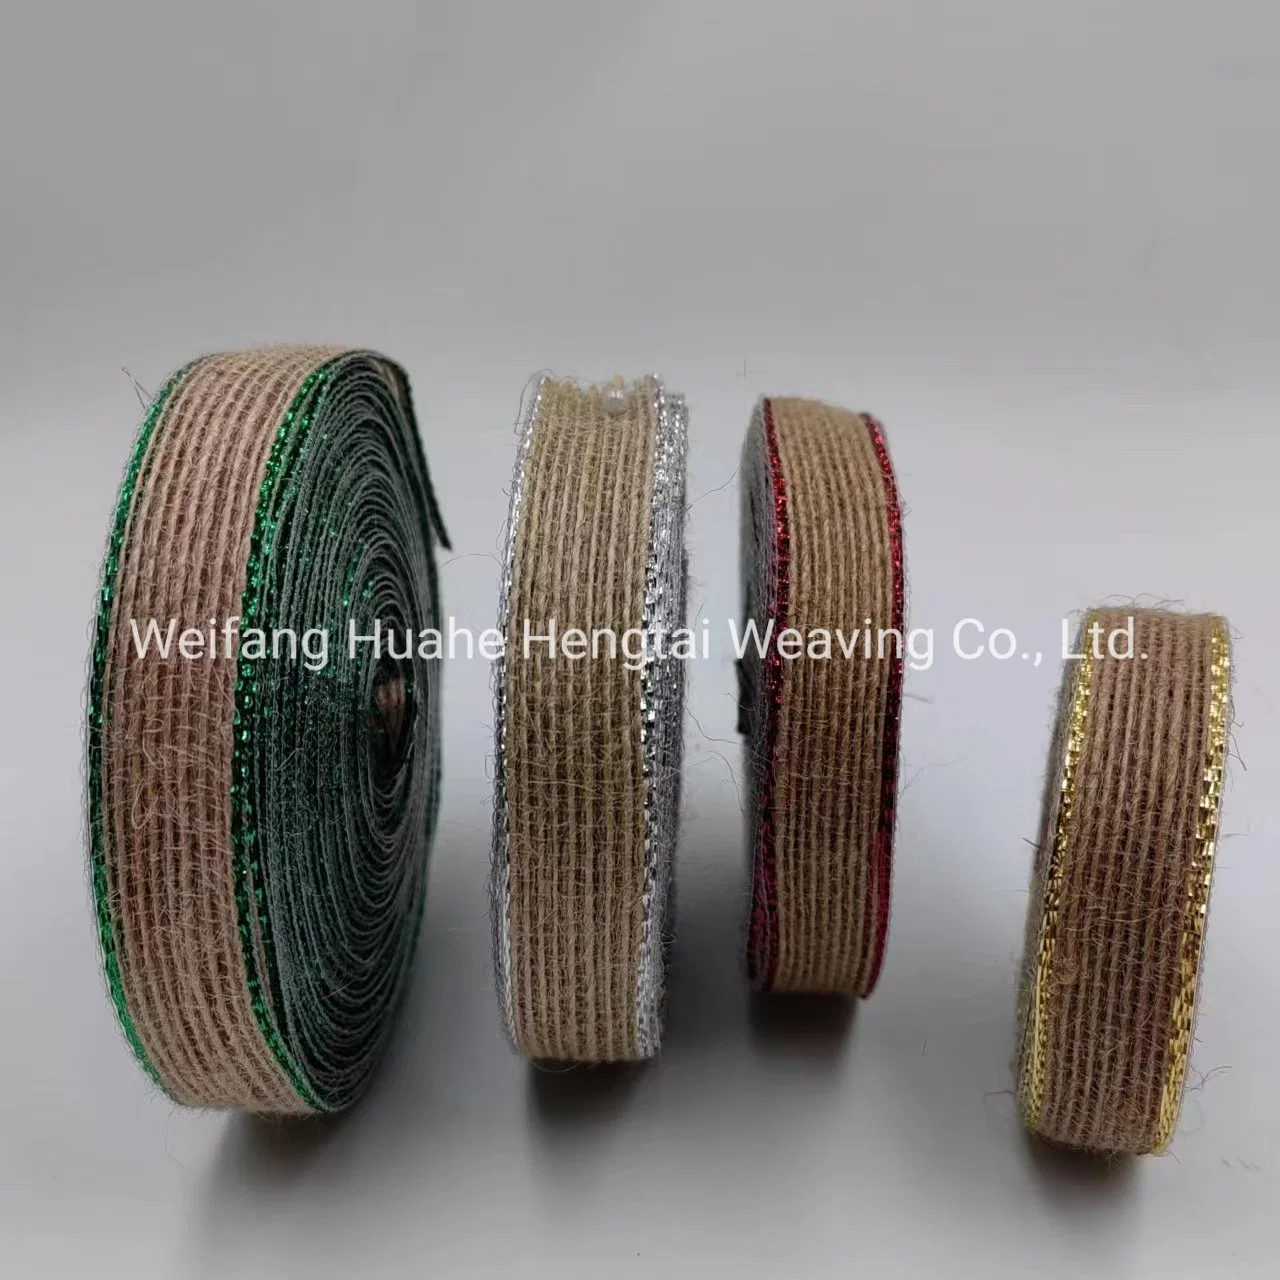 Wholesale of Chinese Colorful Fishing Thread Jute Webbing Party Decoration